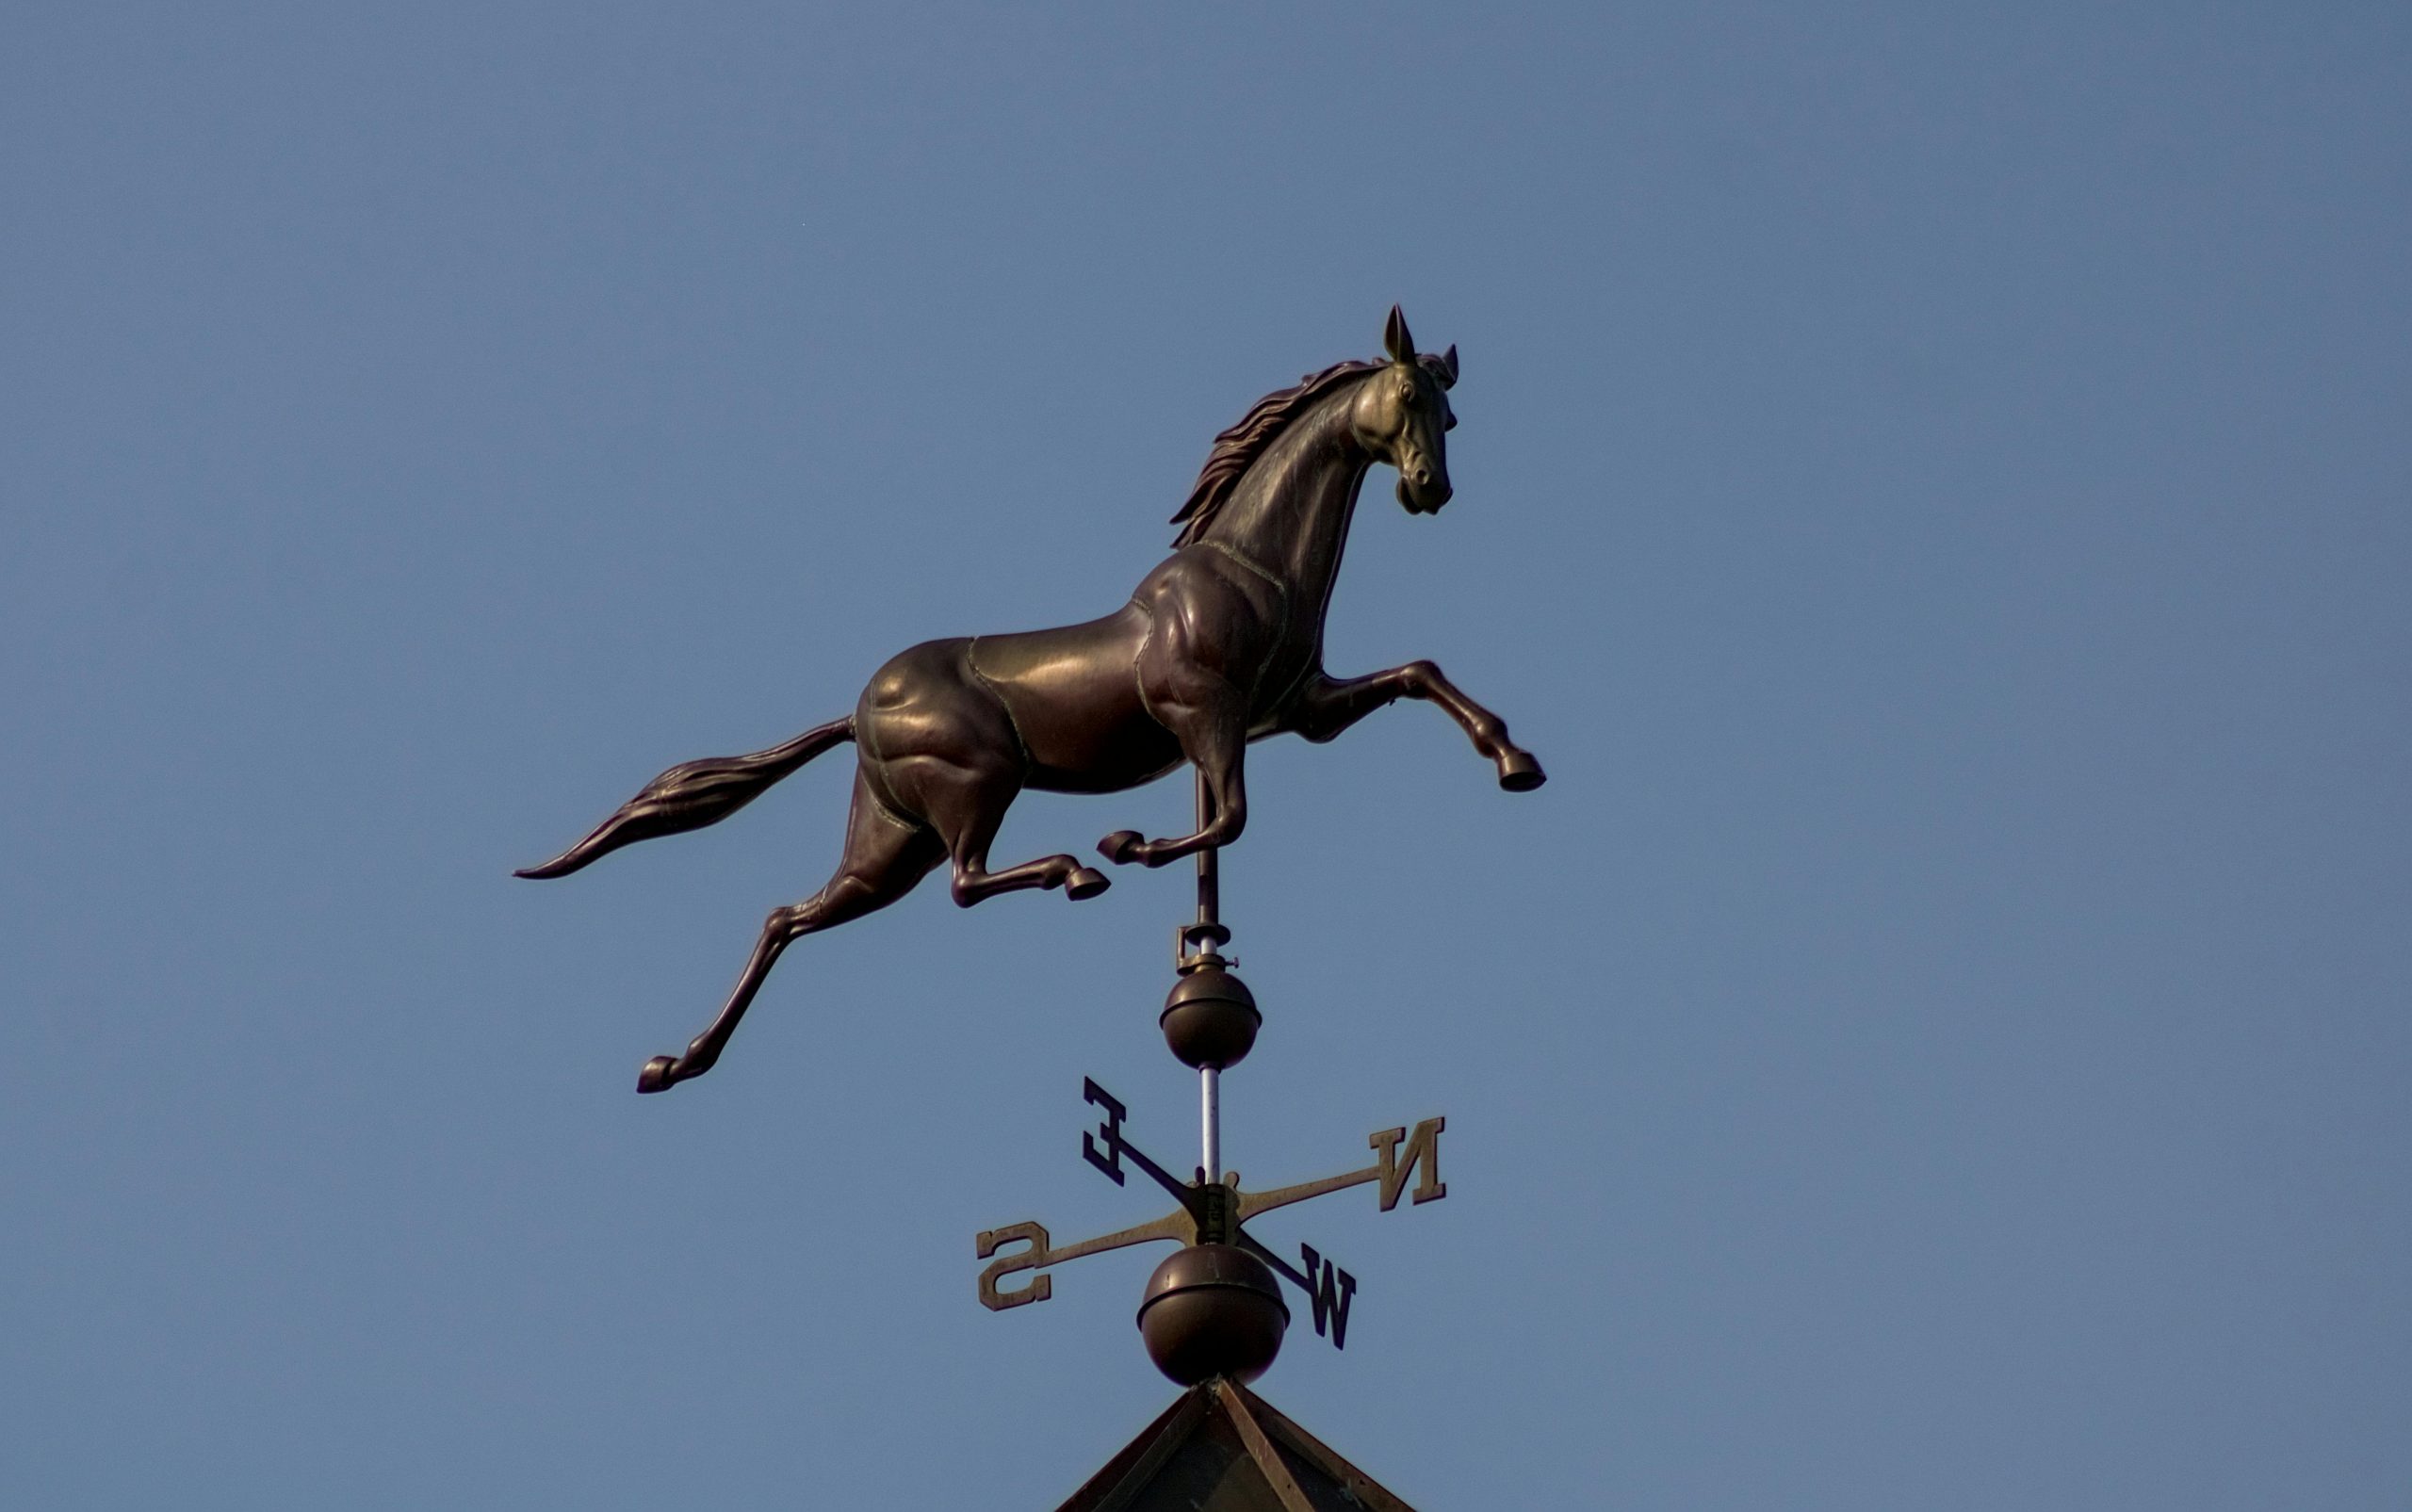 1990 in Chinese Astrology: The Year of the Metal Horse Explained